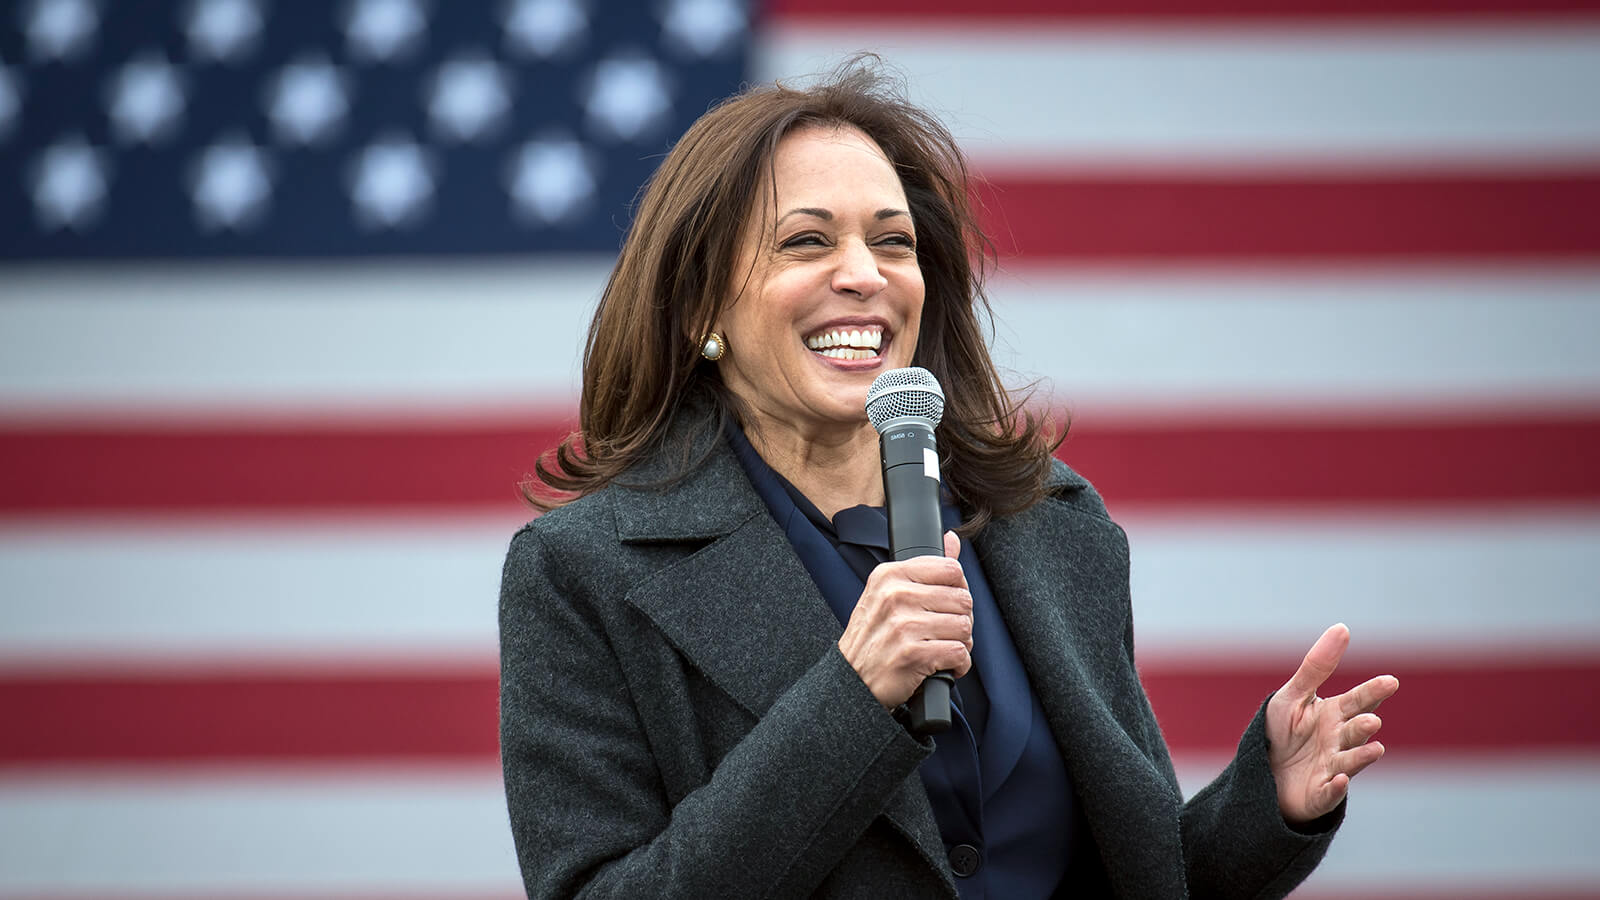 Harris urges union members to vote, show their power